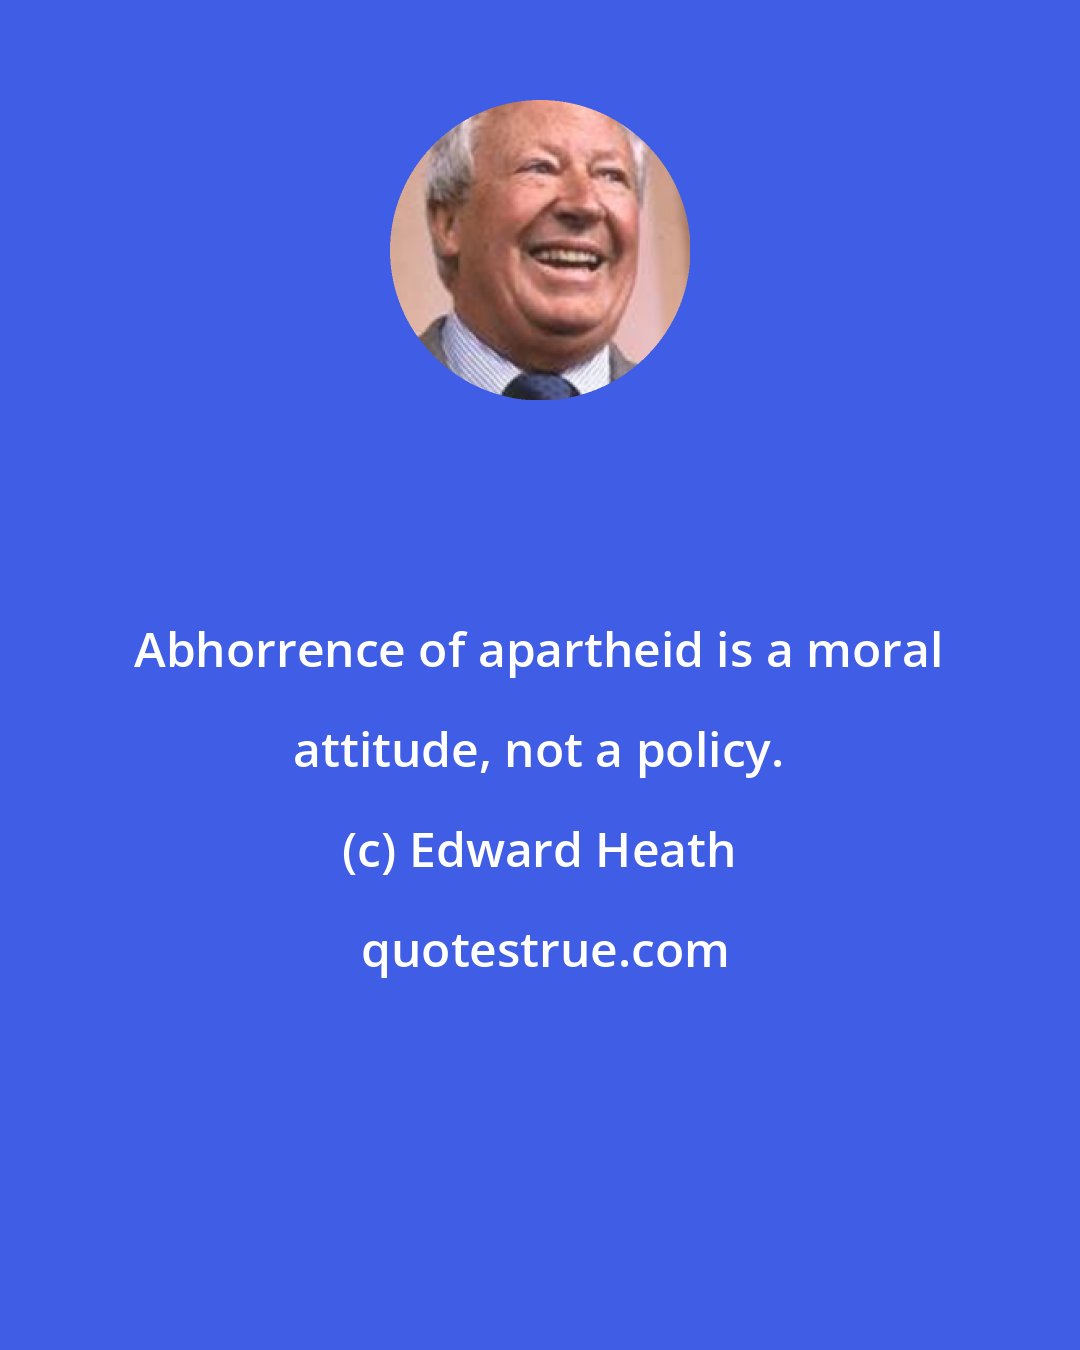 Edward Heath: Abhorrence of apartheid is a moral attitude, not a policy.